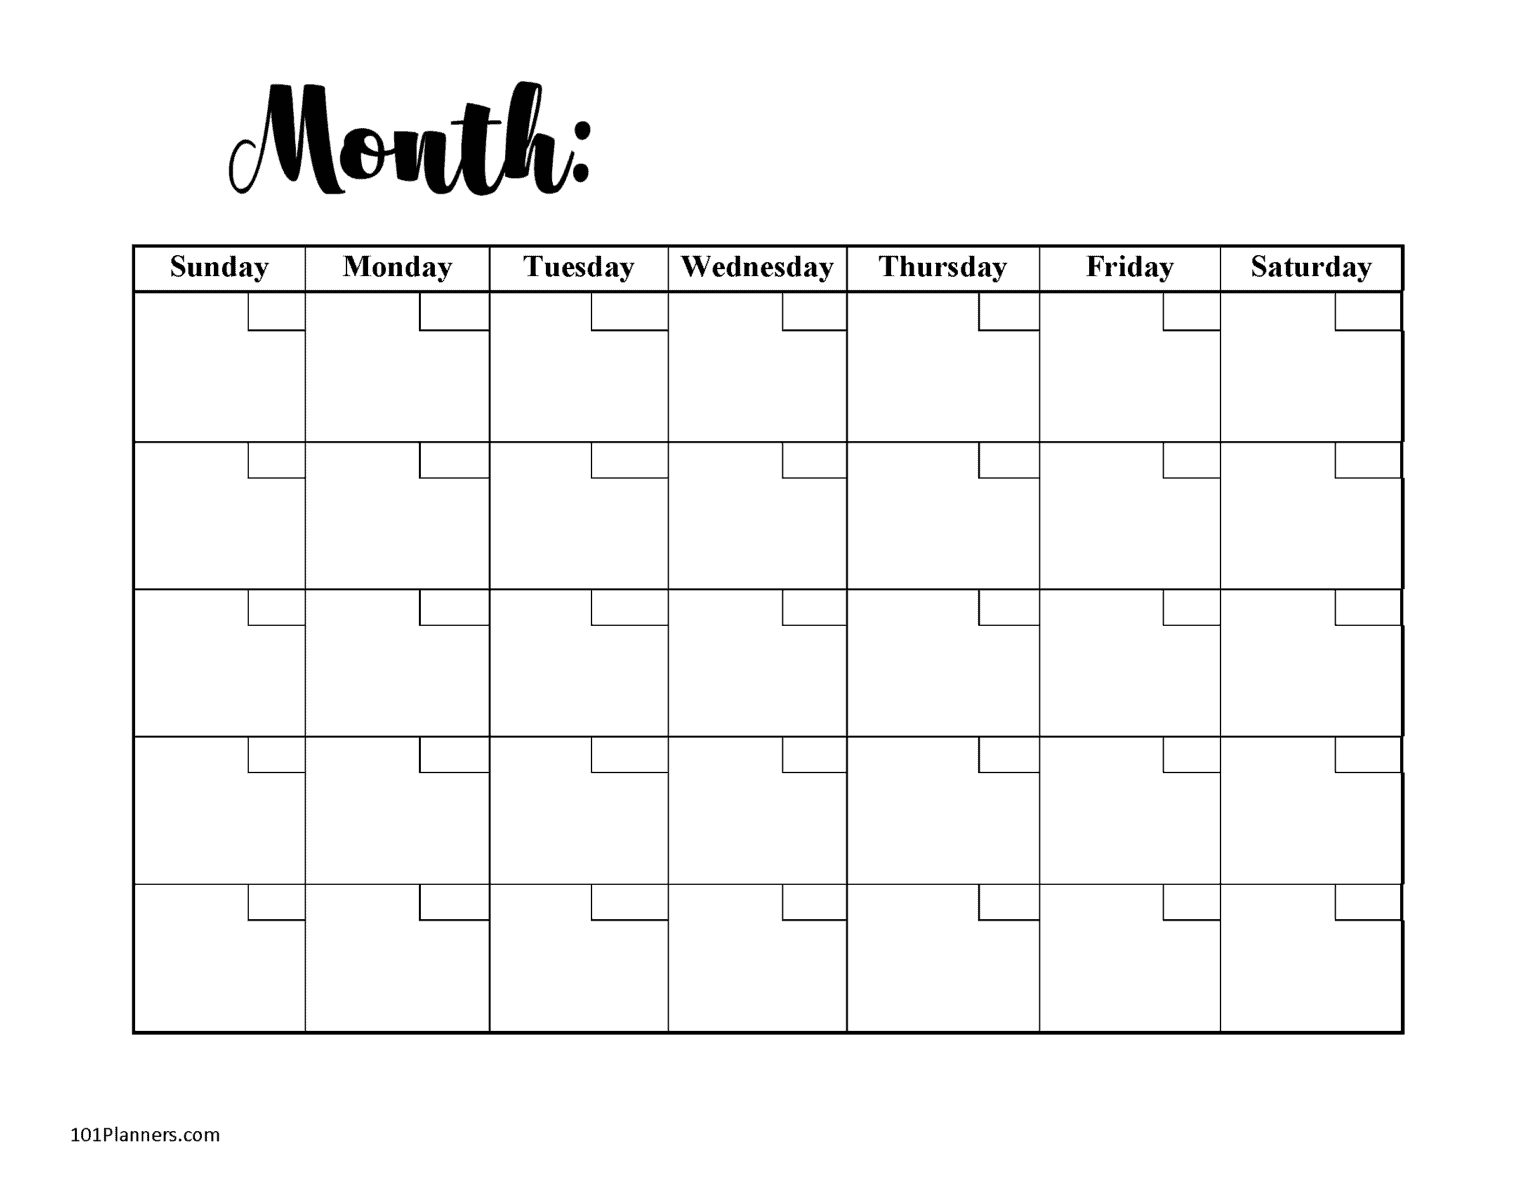 FREE Monthly Planner Edit Online And Print At Home - Free Printable 20241 Calendar